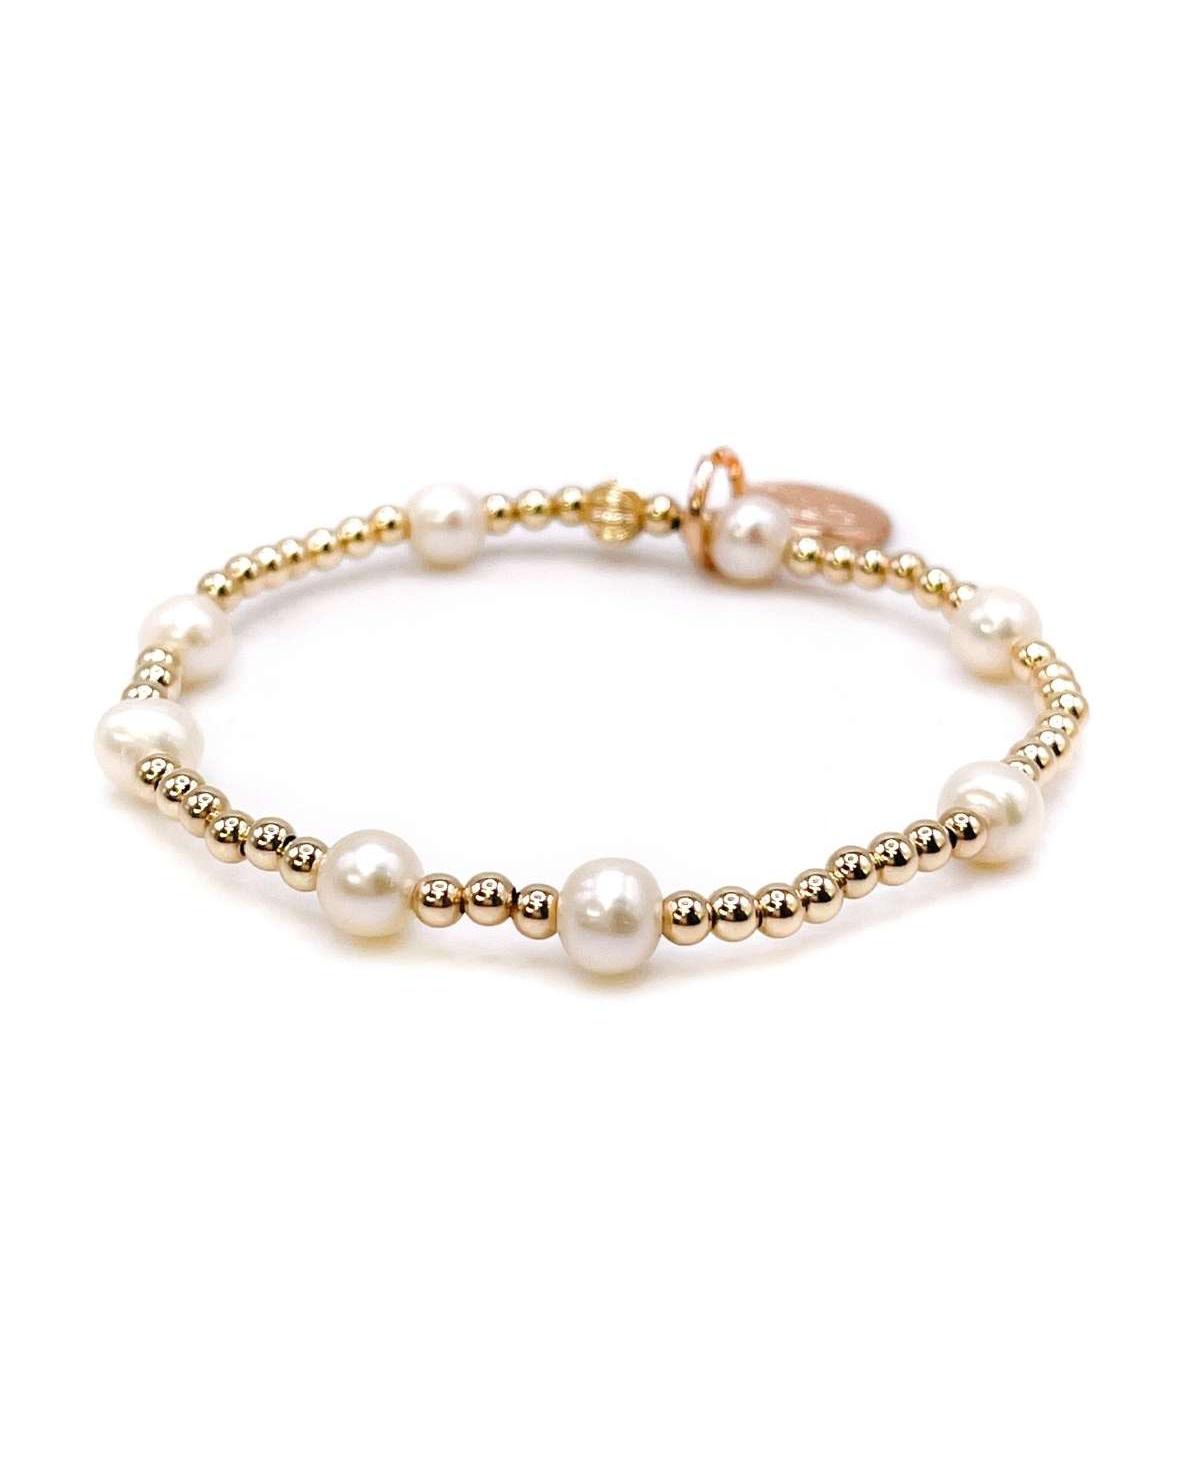 Non-Tarnishing Gold filled, 3mm Gold Ball and Freshwater Pearl Stretch Bracelet - Gold